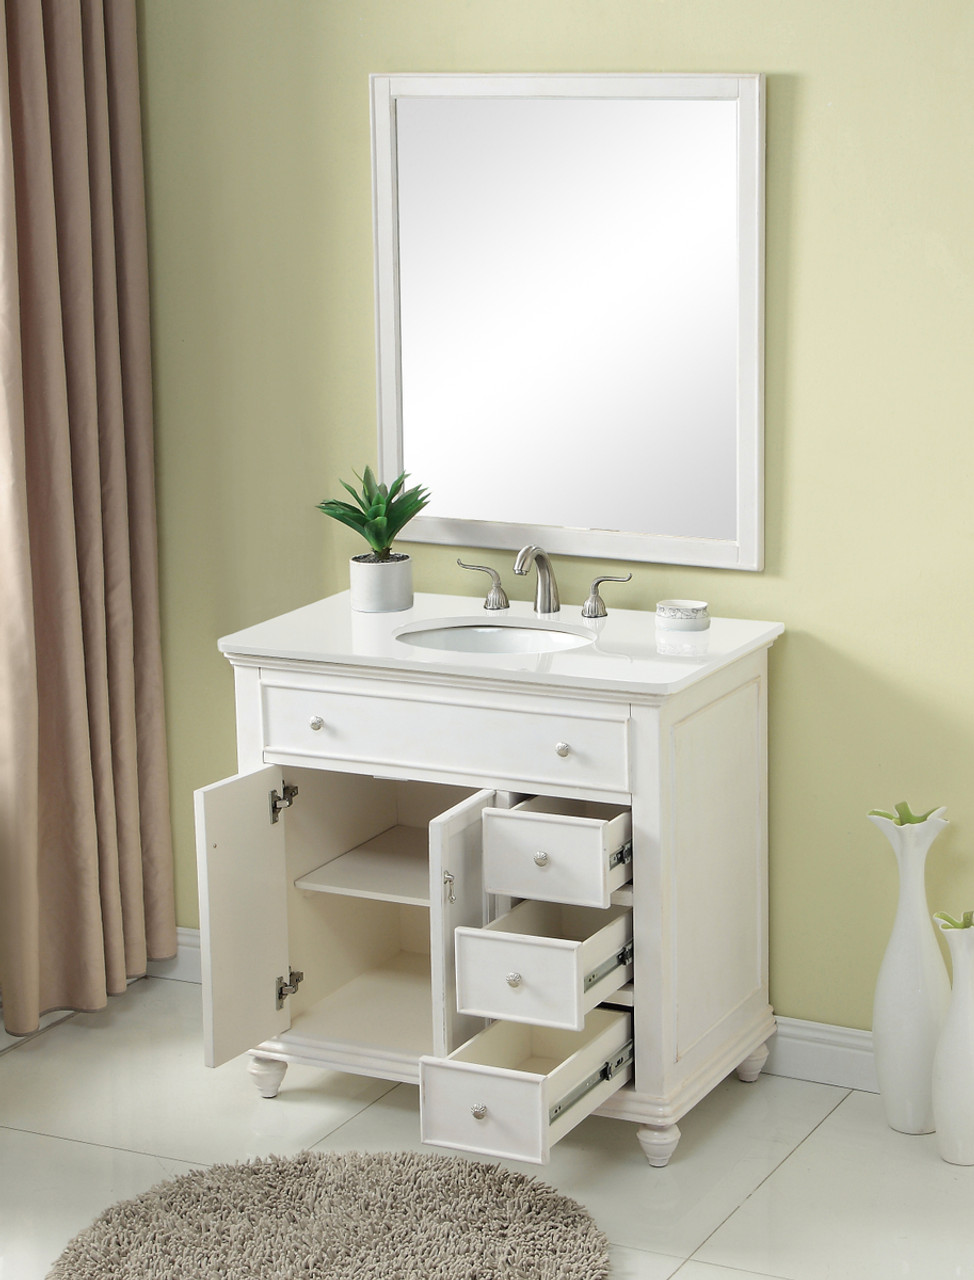 Elegant Kitchen and Bath VF12336AW-VW 36 inch Single Bathroom vanity in Antique White with ivory white engineered marble